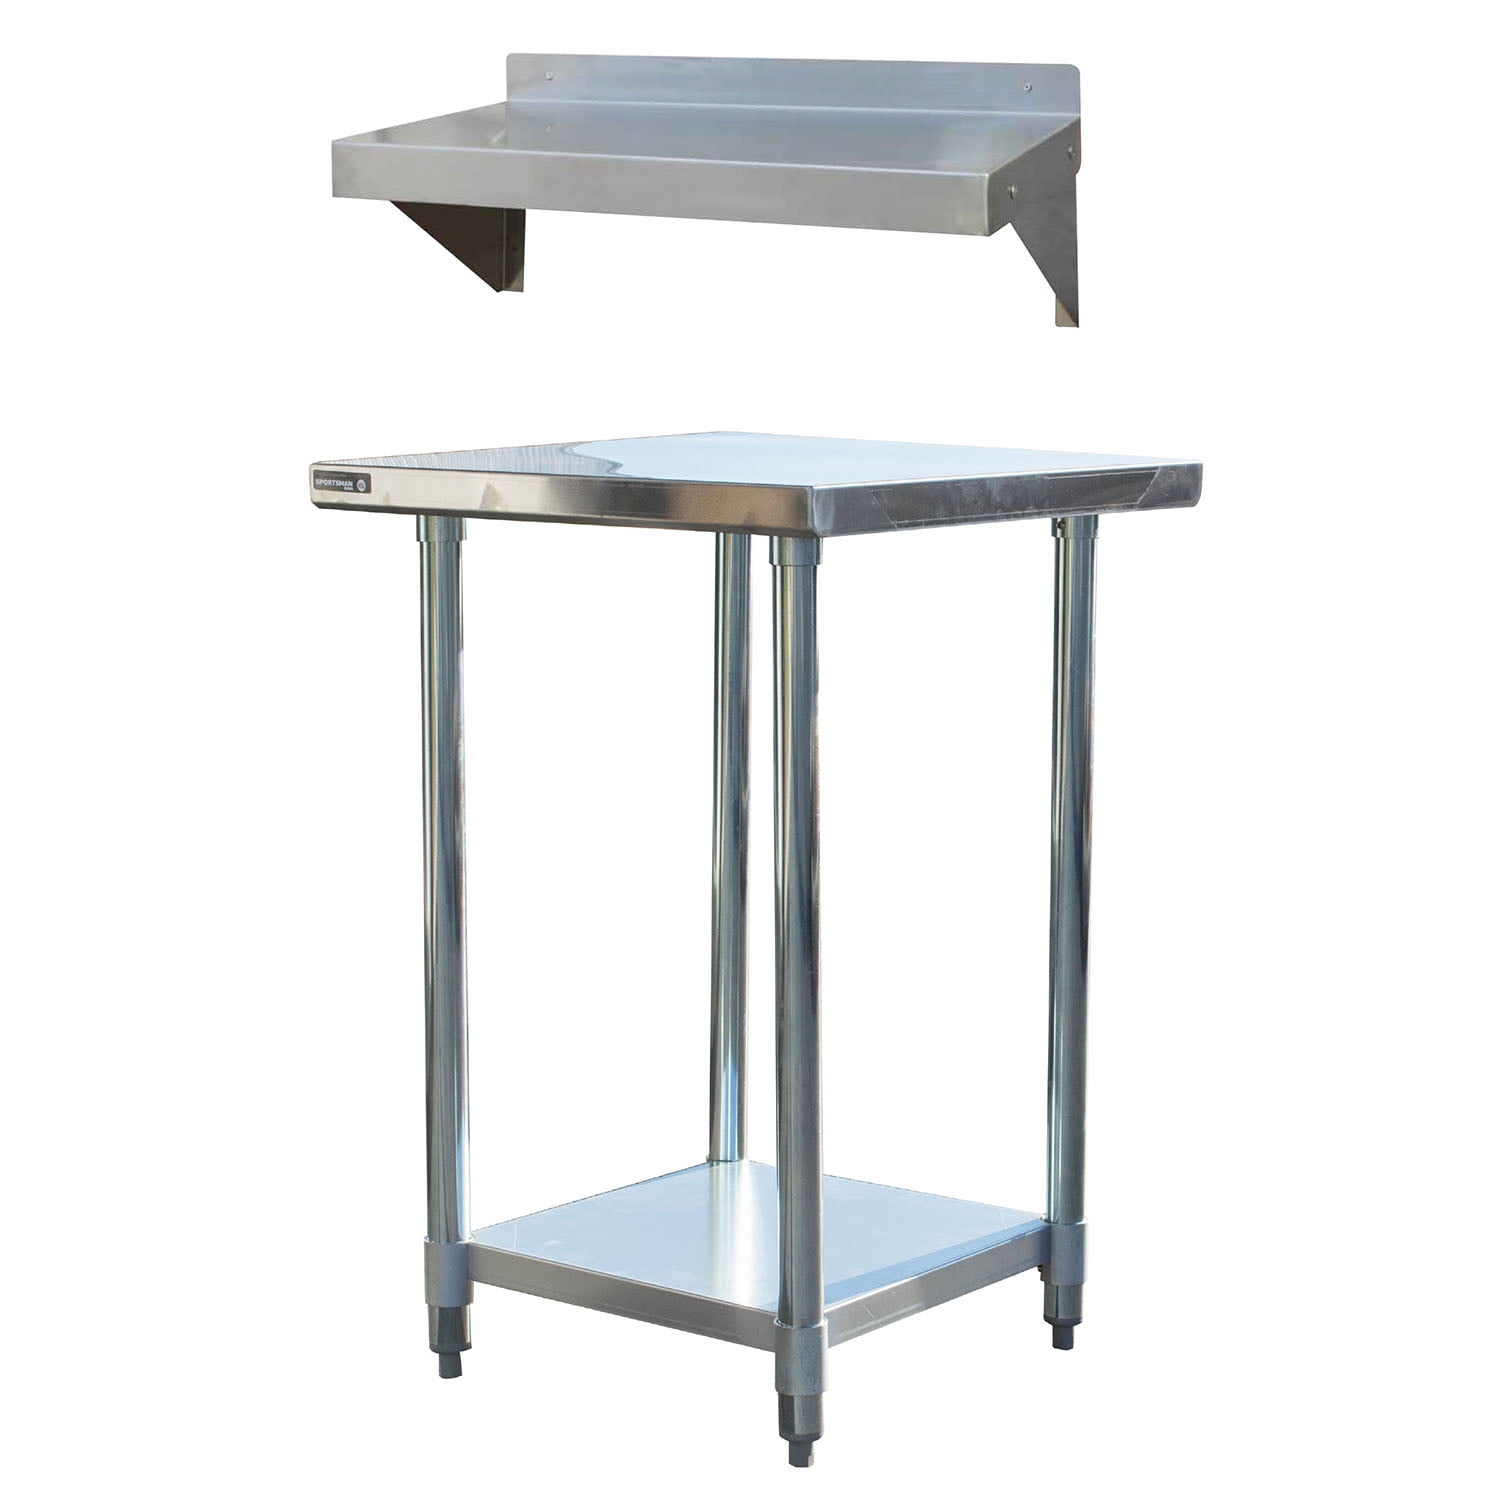 Sportsman Series SSWSET24 24 in. Stainless Steel Work Station with Workbench Table & Utility Shelf - 24 in. - Silver